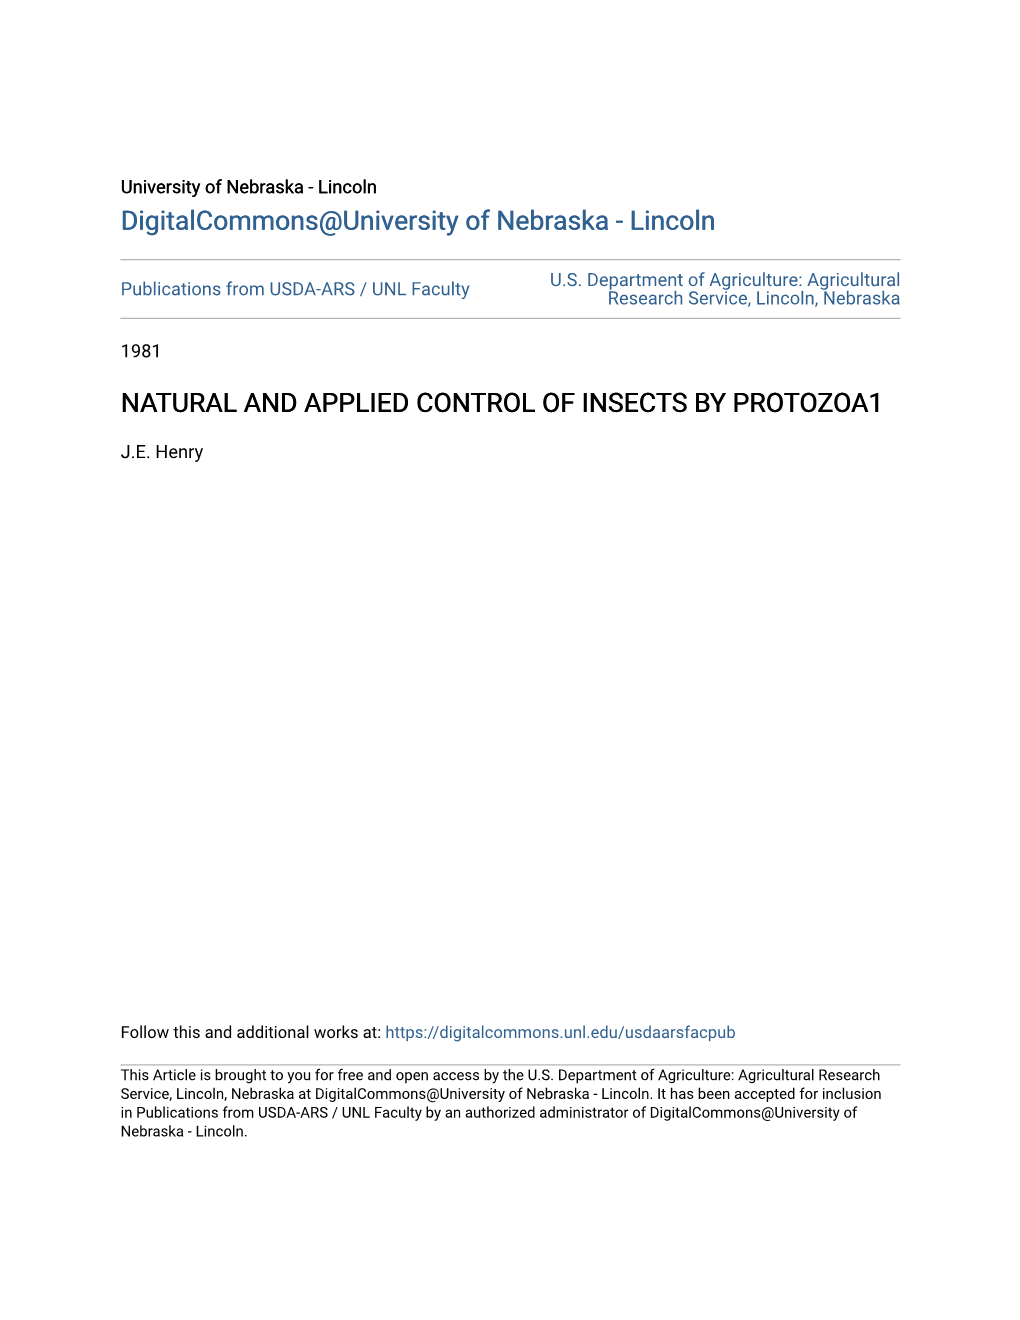 Natural and Applied Control of Insects by Protozoa1